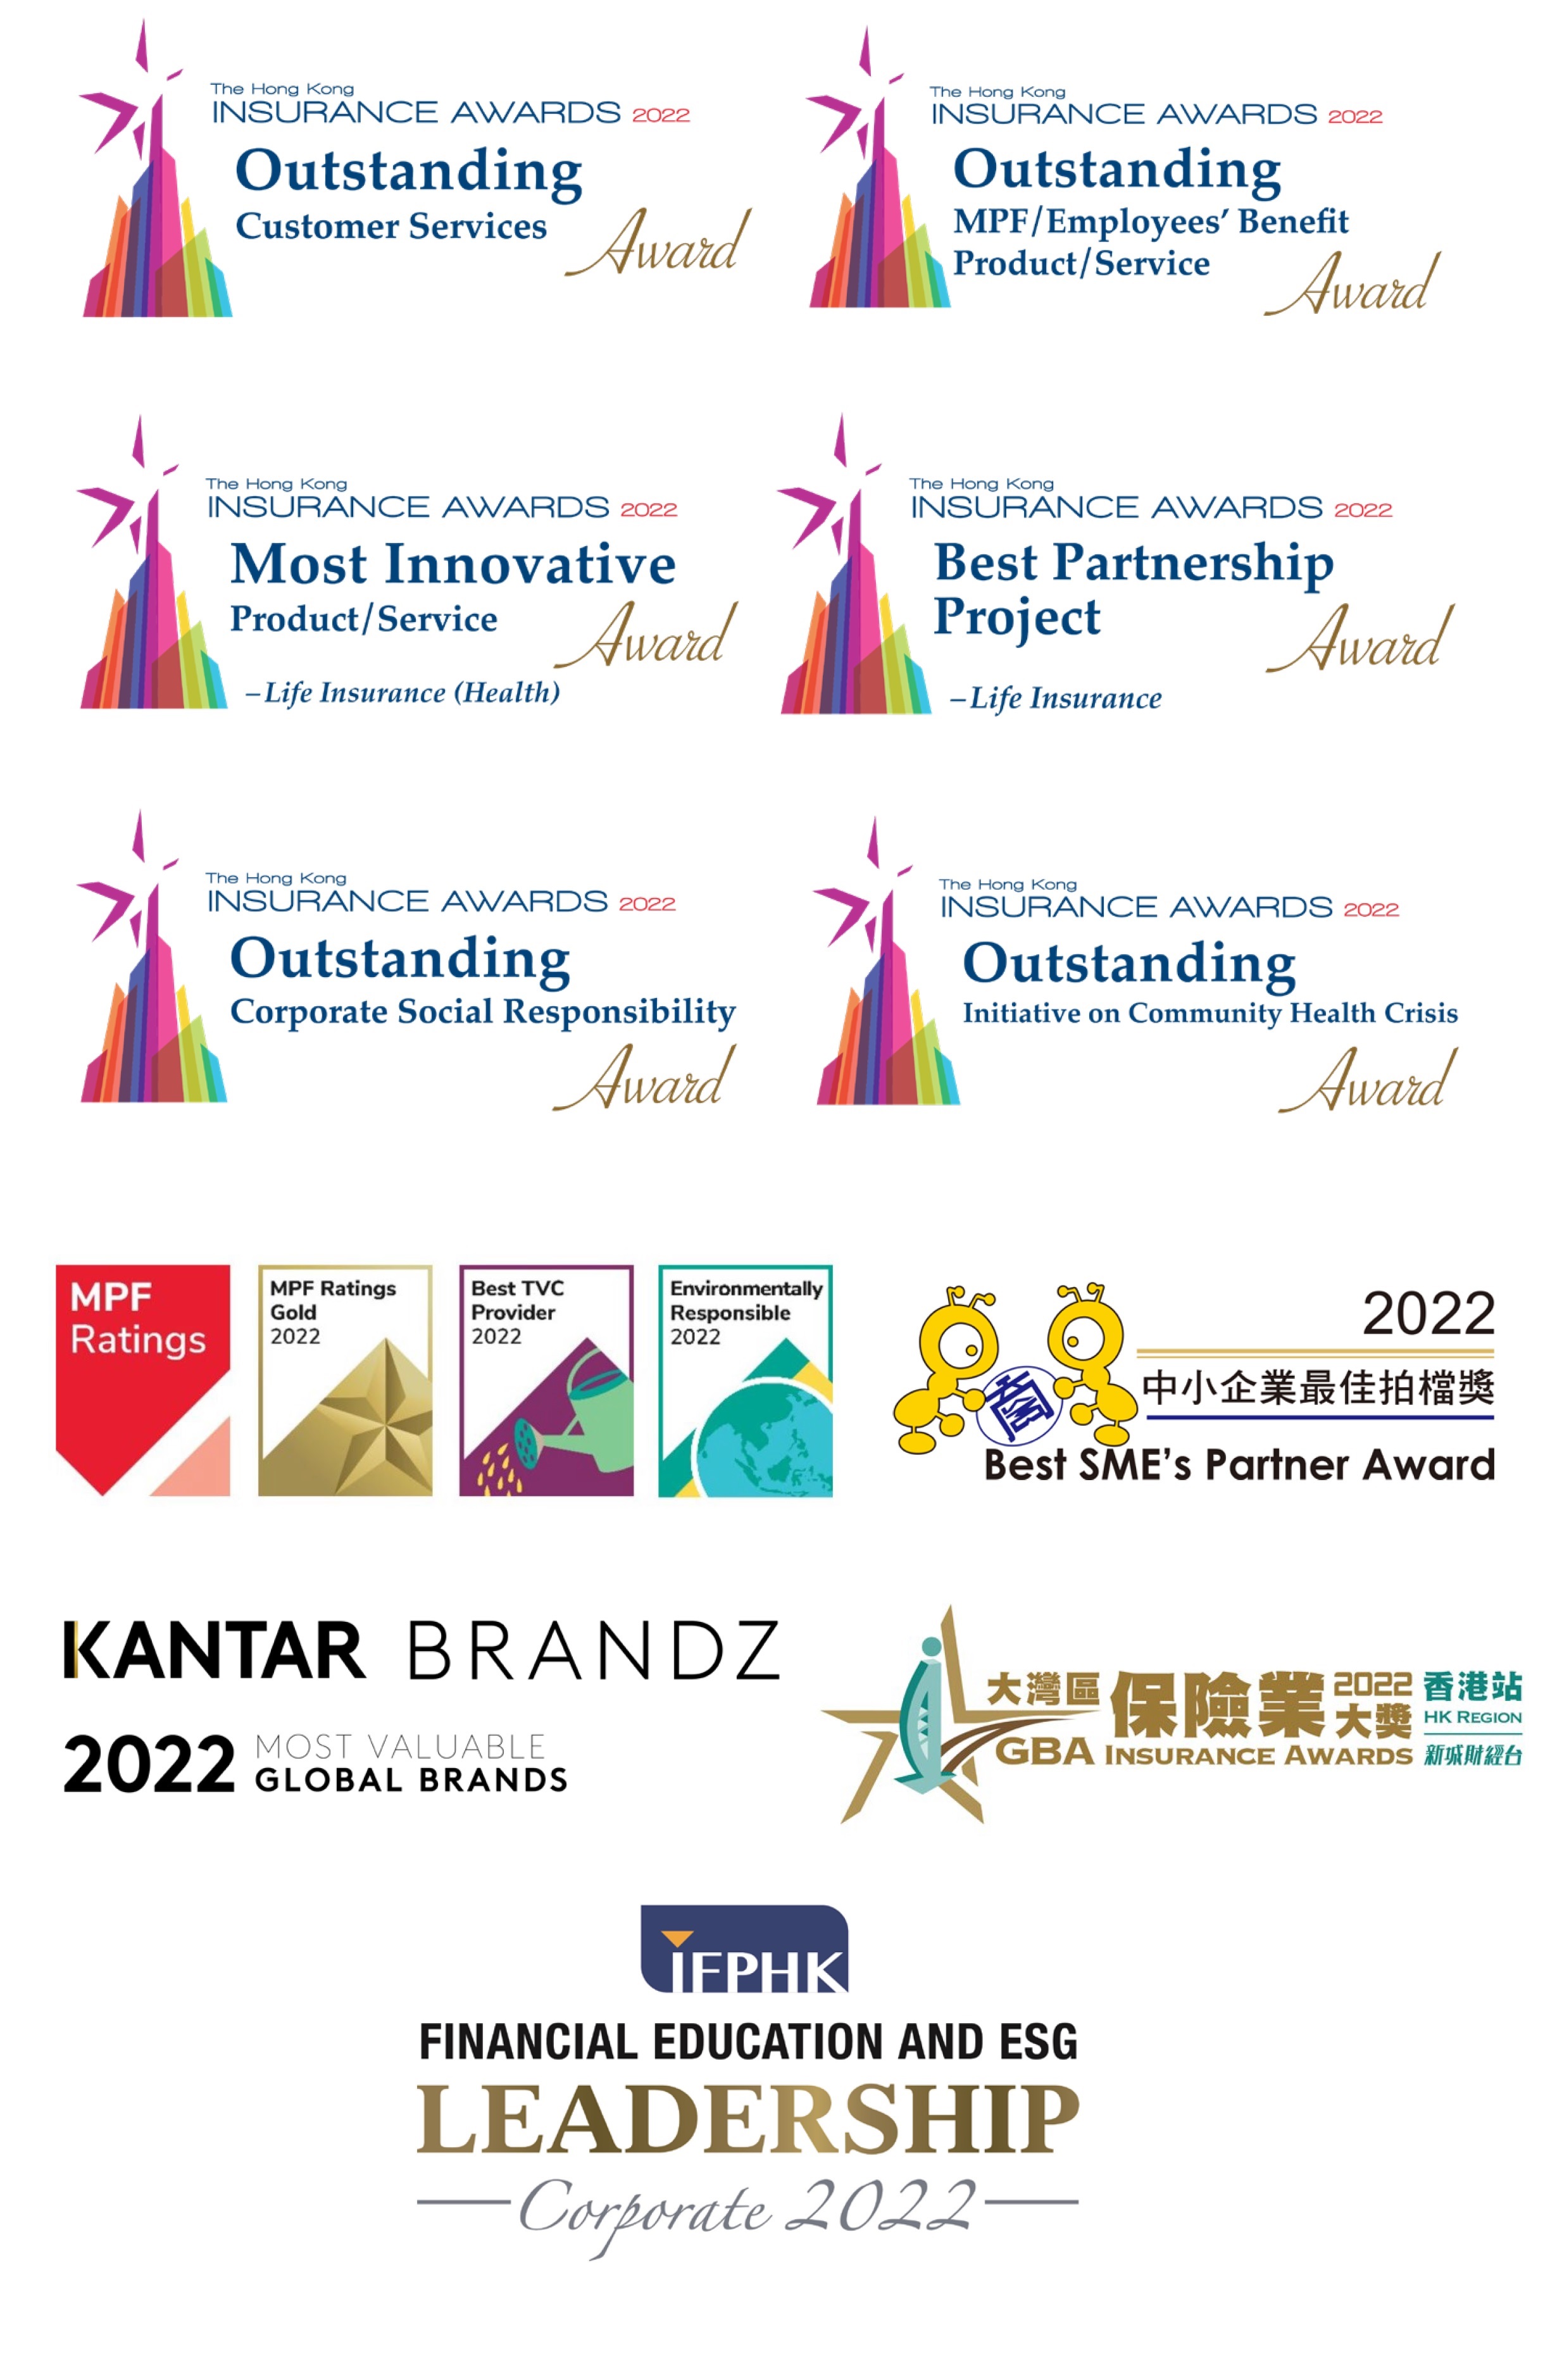 Reader’s Digest Trusted Brand Award in Hong Kong